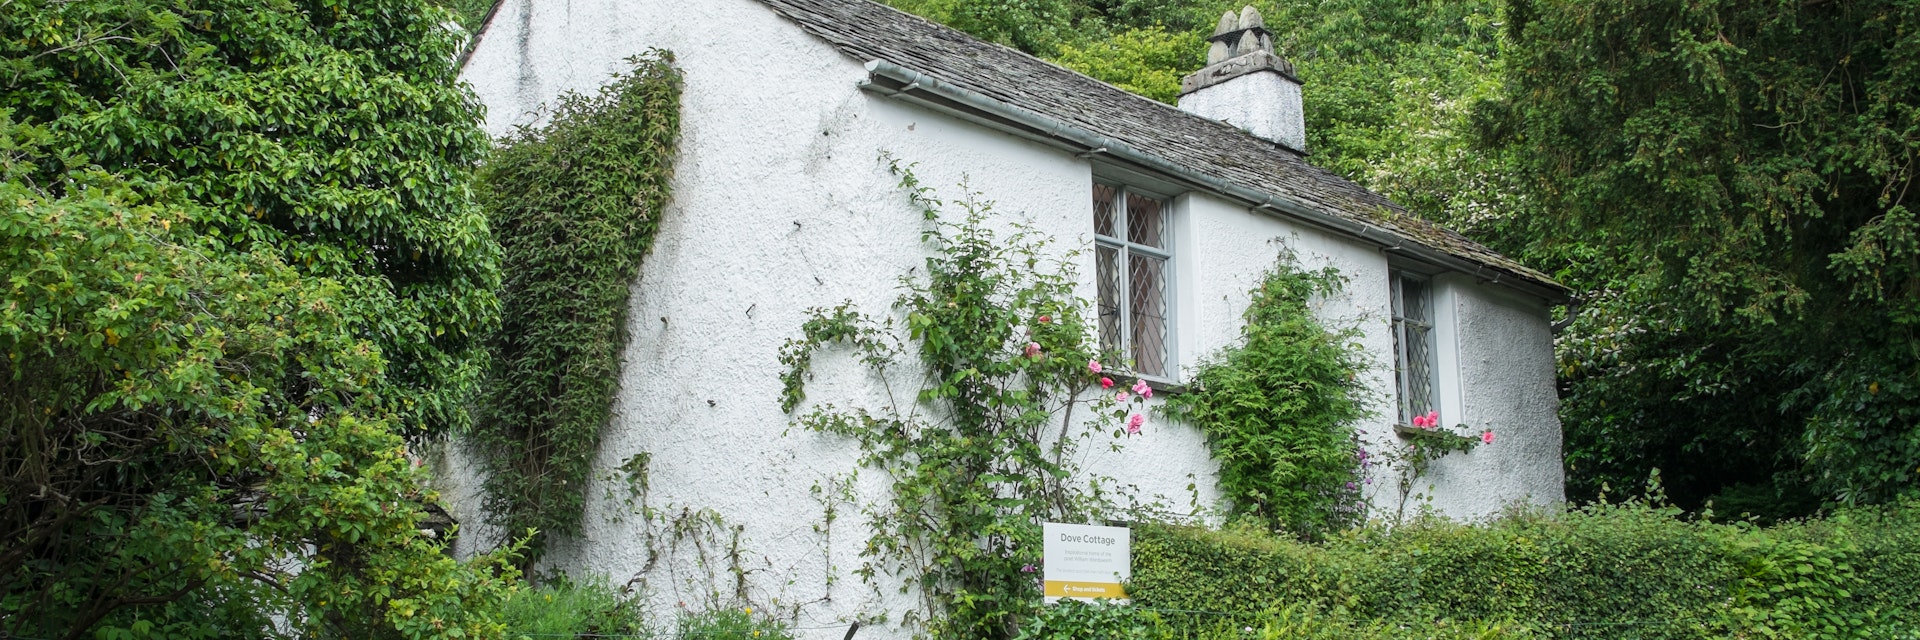 Grasmere, Lake District, UK - June 2017: Dove Cottage - picturesque home of the poet William Wordsworth.
690001708